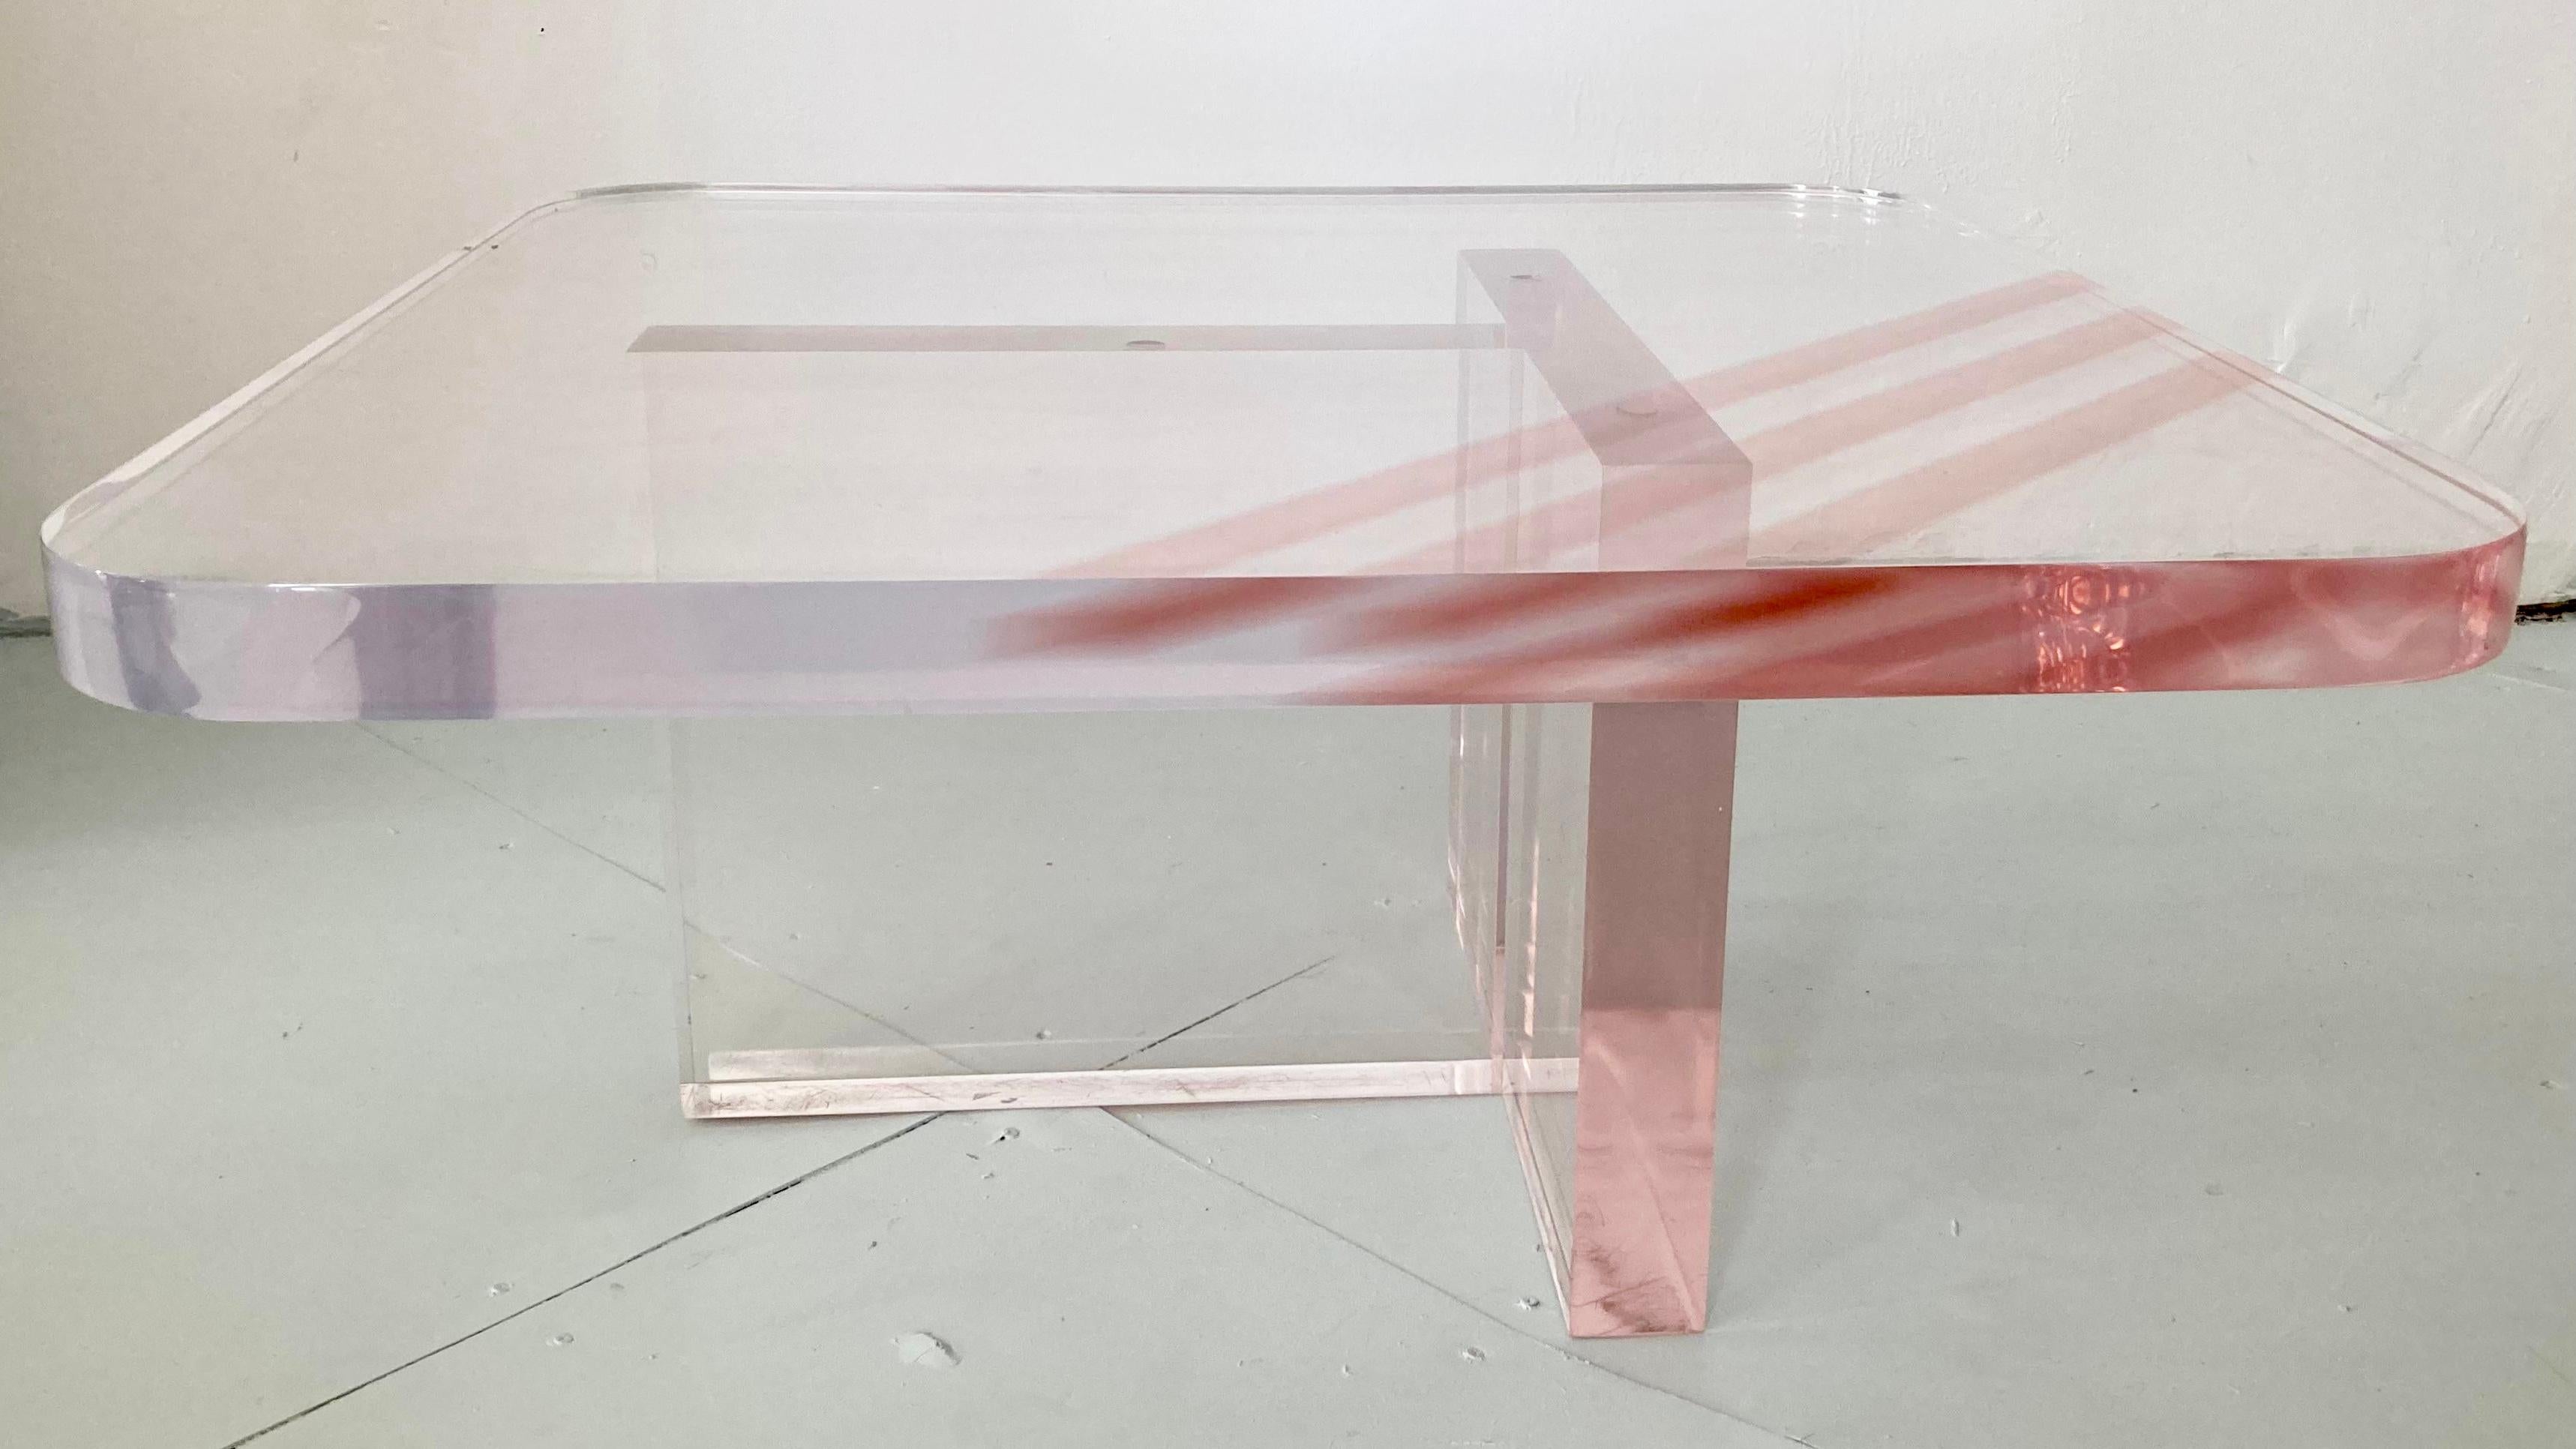 Fabulous Karl Springer rose tinted lucite coffee table. Great addition to your modern inspired interiors. This item is not marked or signed by the designer or original manufacturer.